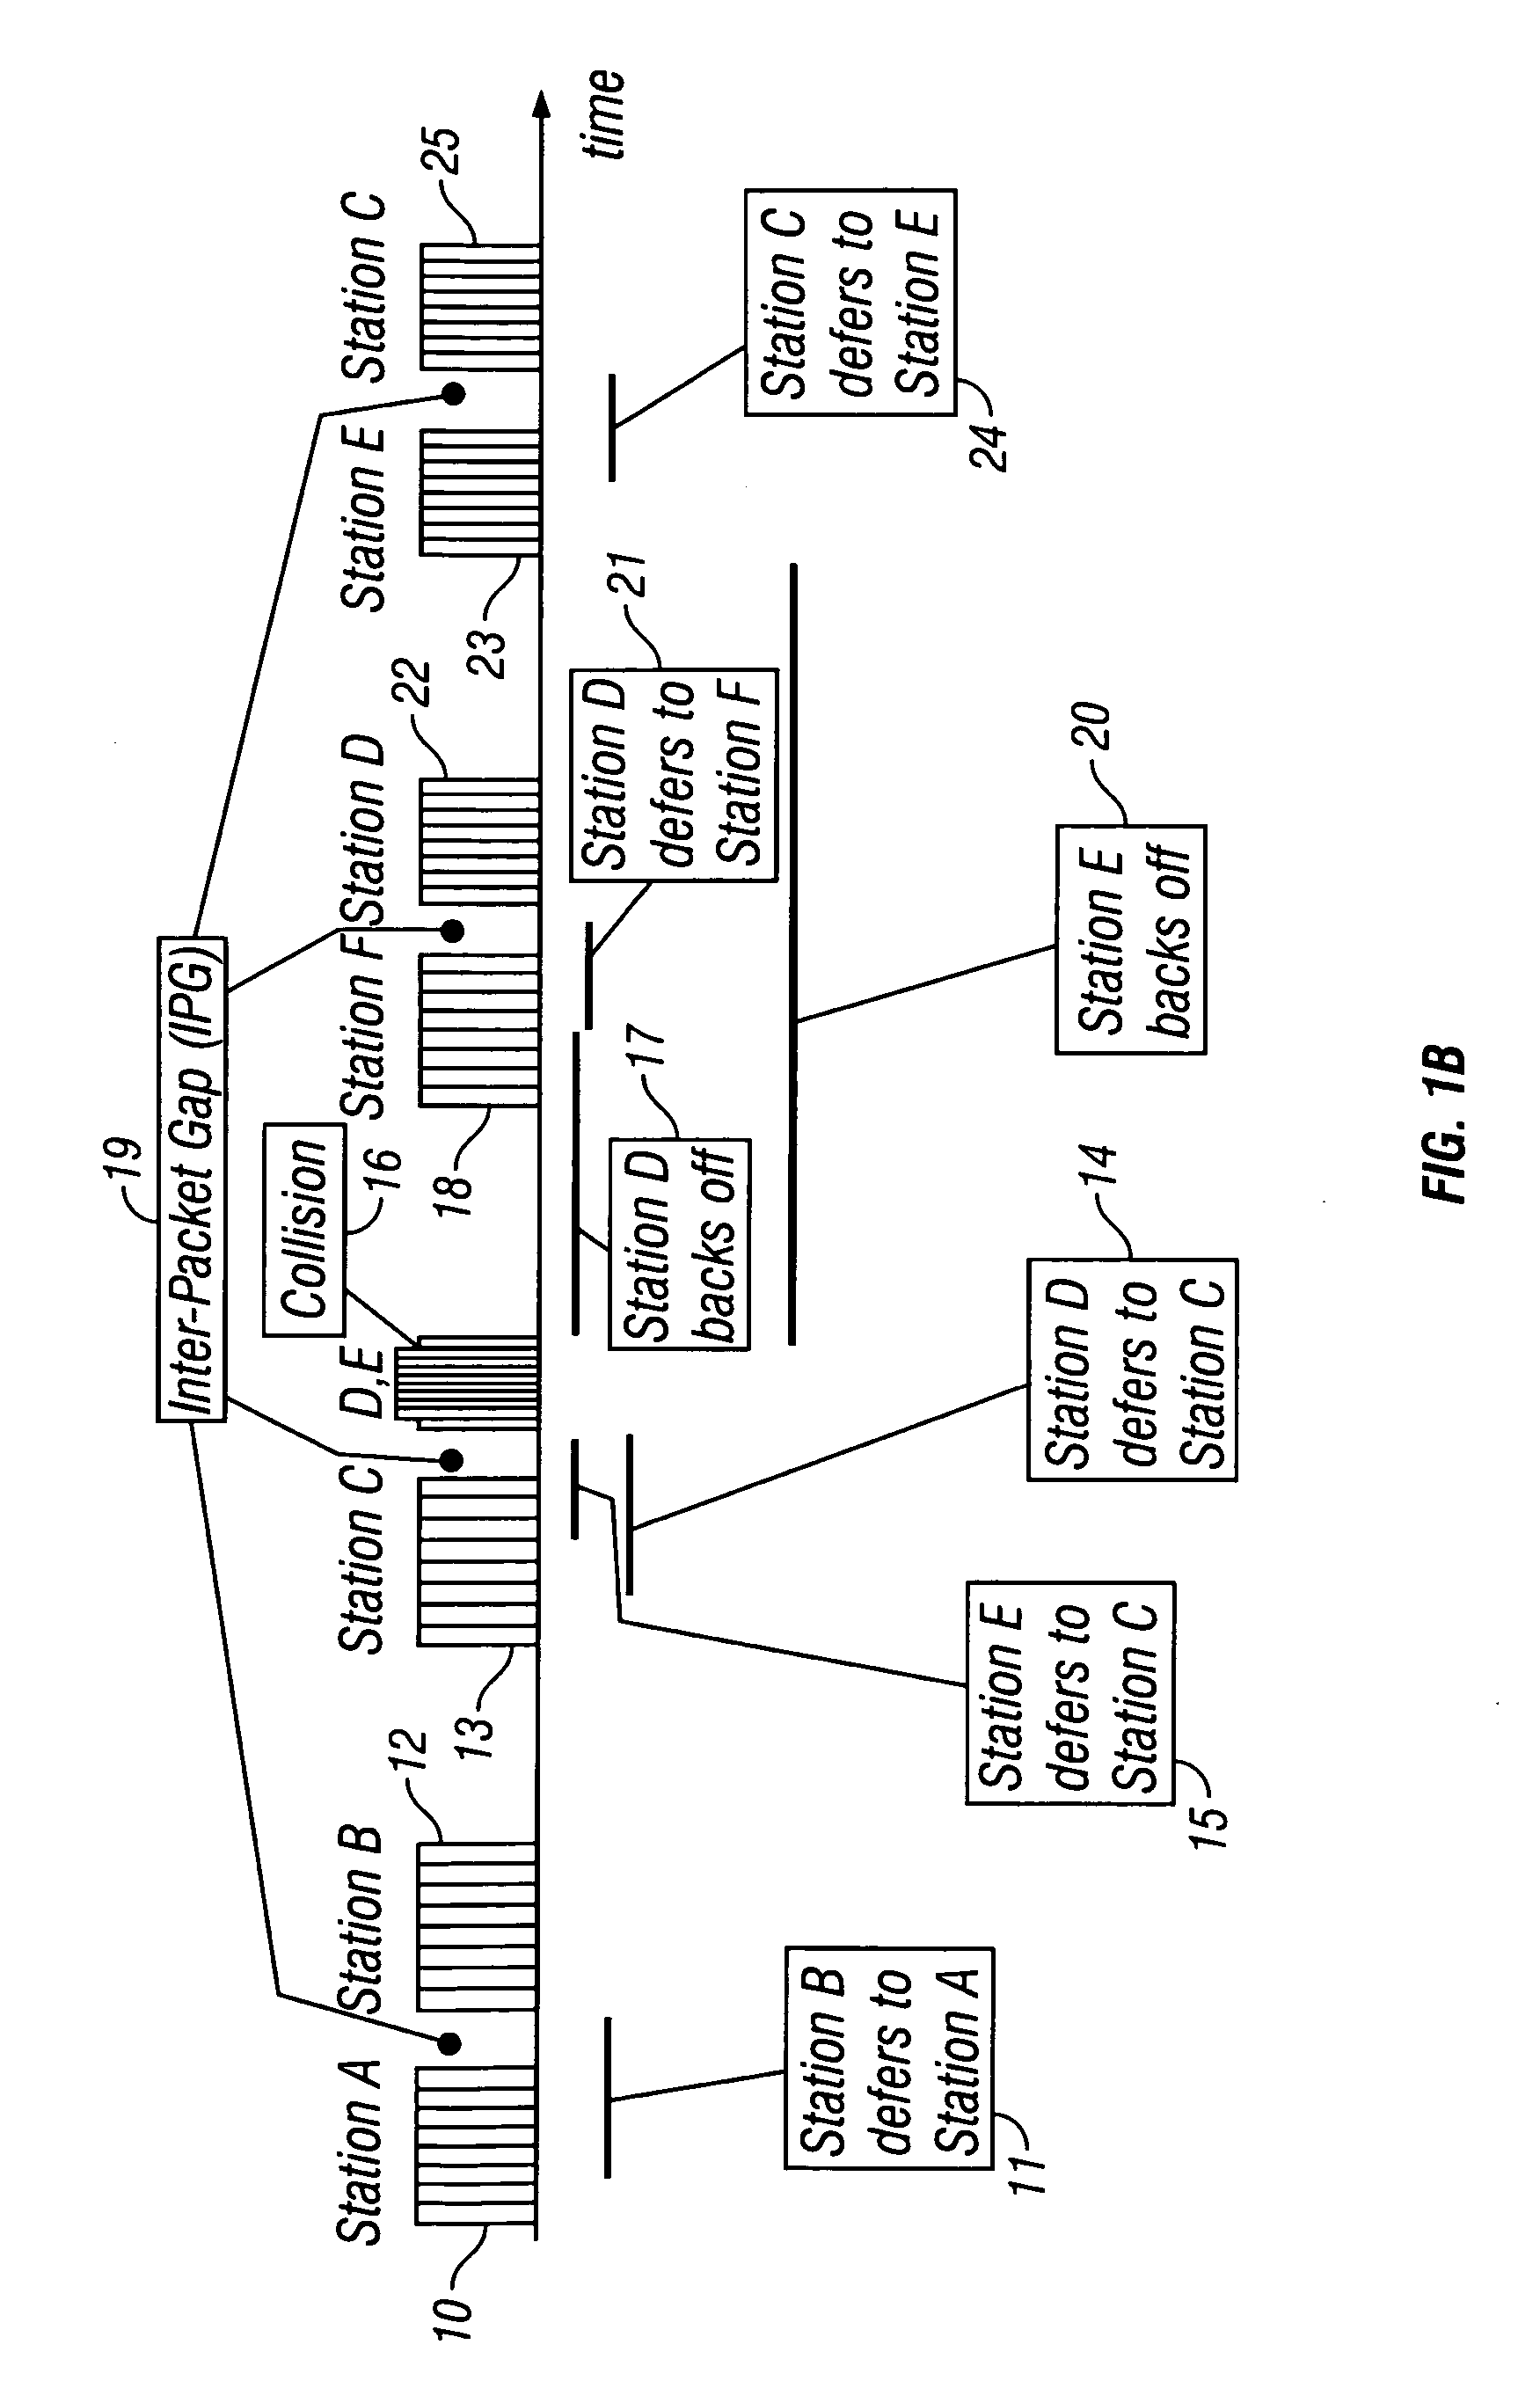 Methods and apparatus for providing quality-of-service guarantees in computer networks